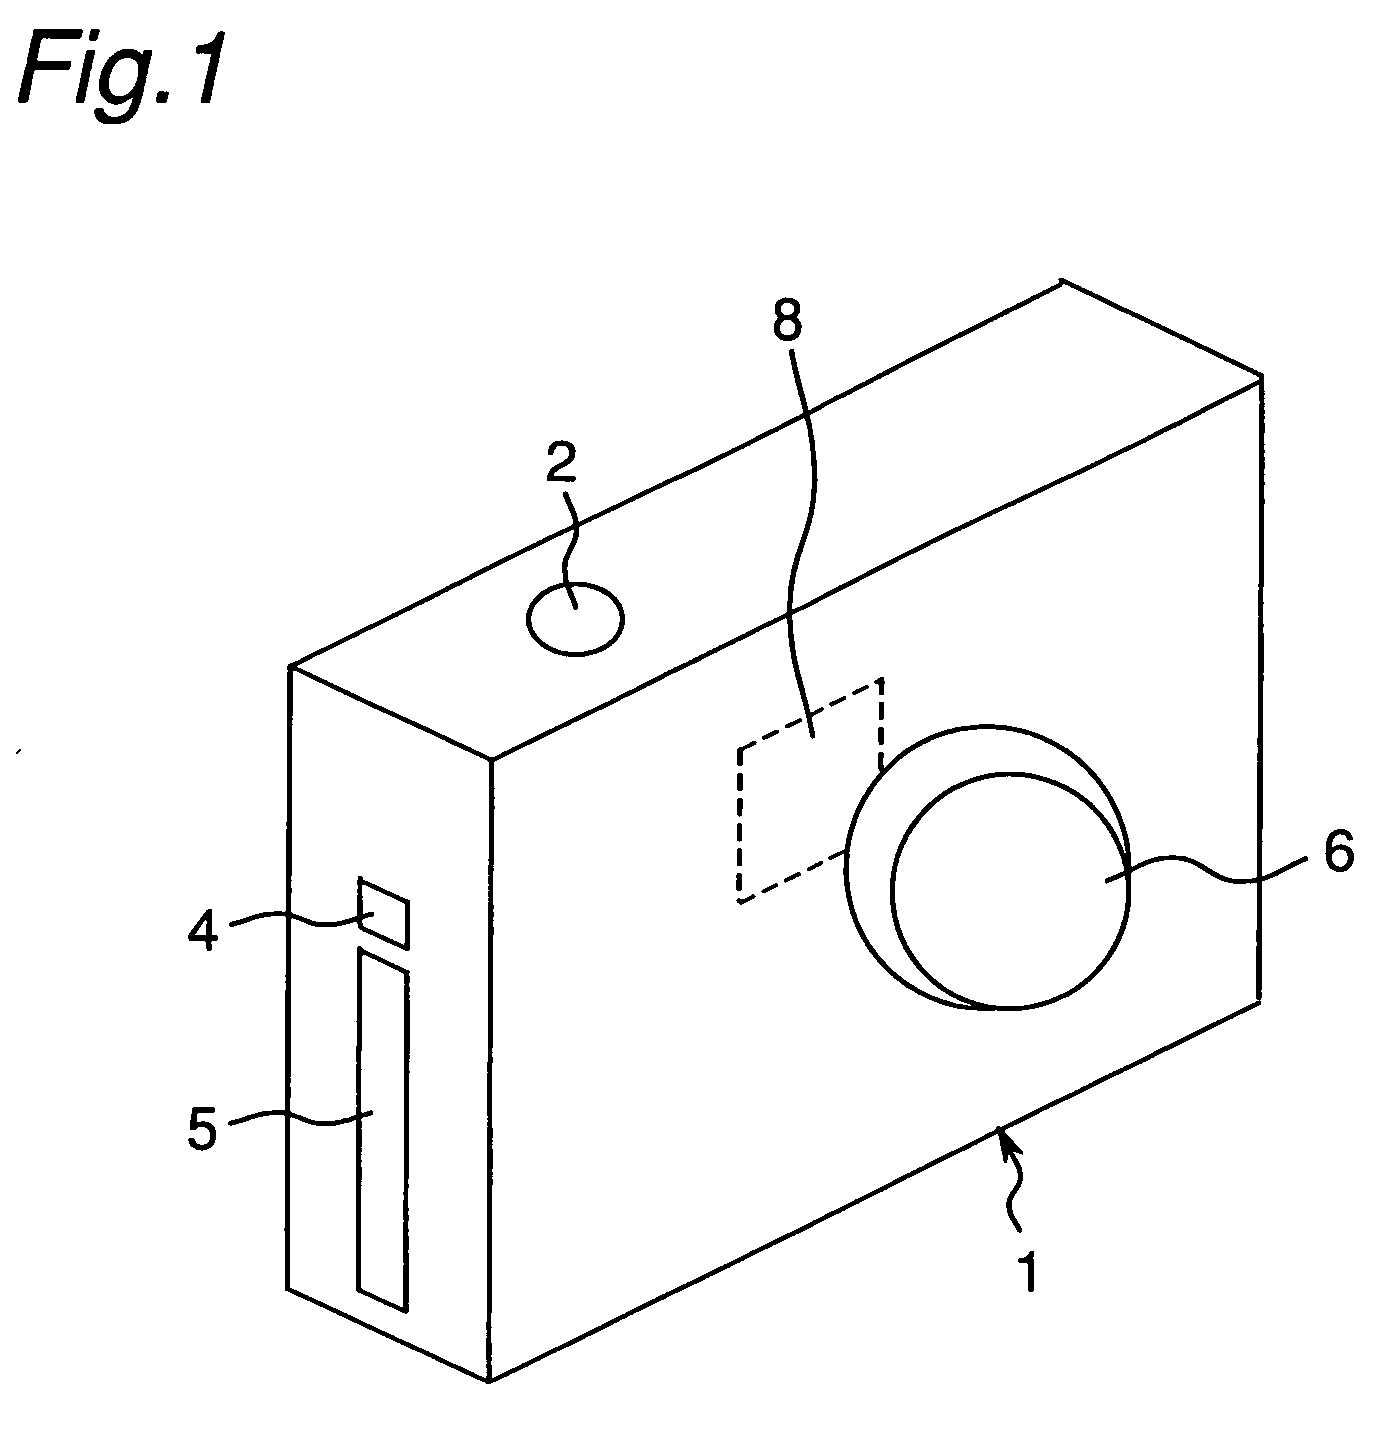 Apparatus capable of image capturing